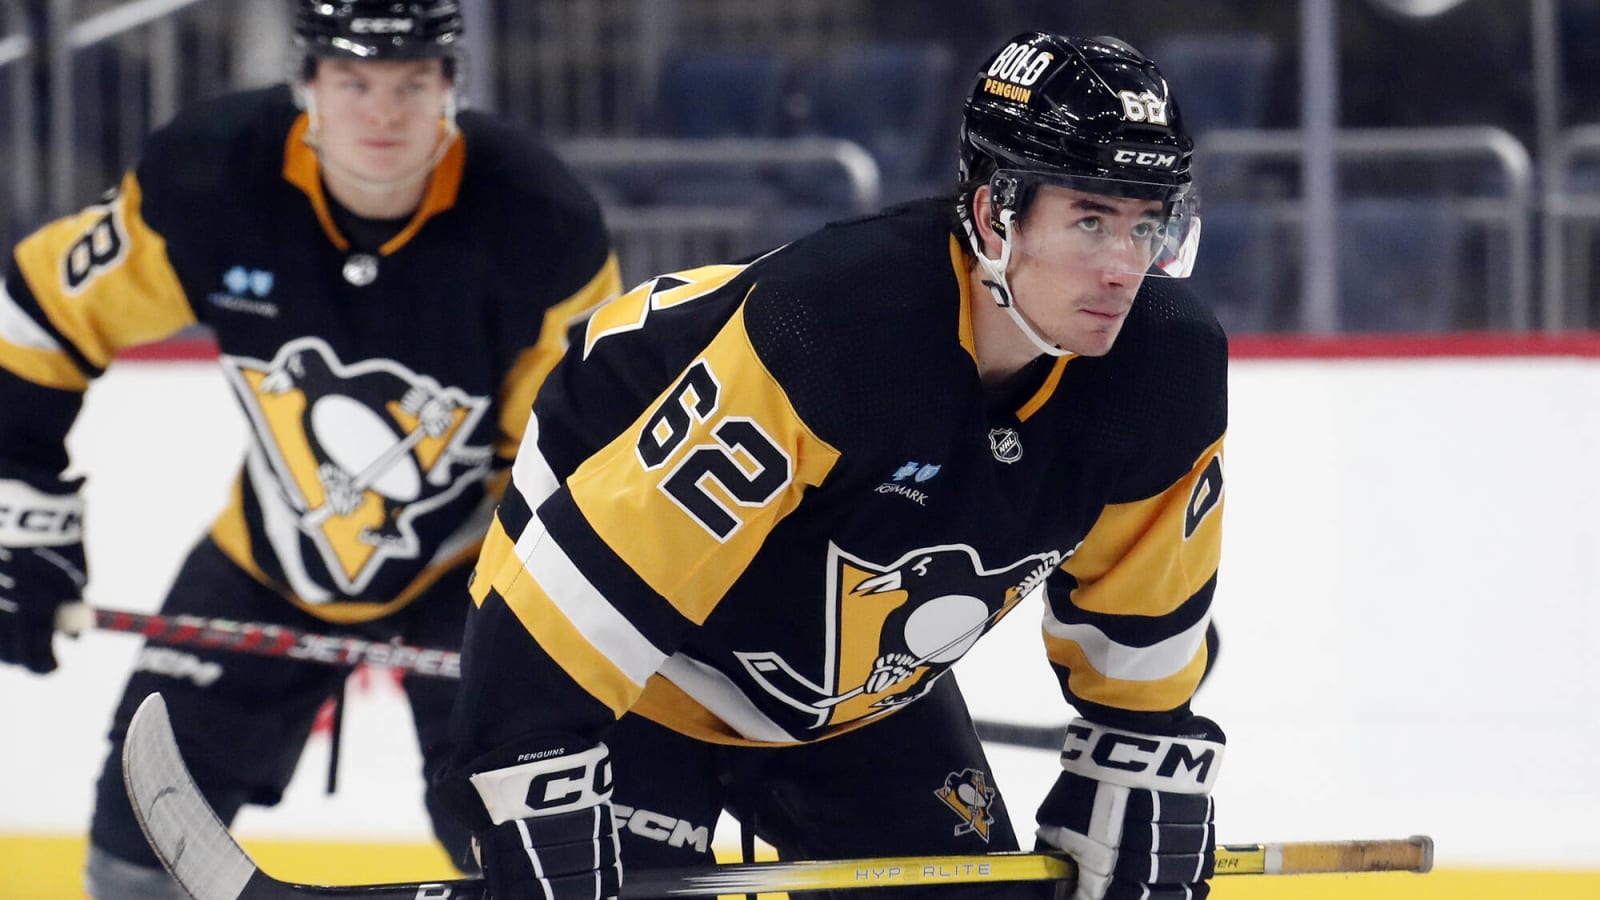 Brayden Yager, Two Other Penguins Prospects Set for World Juniors